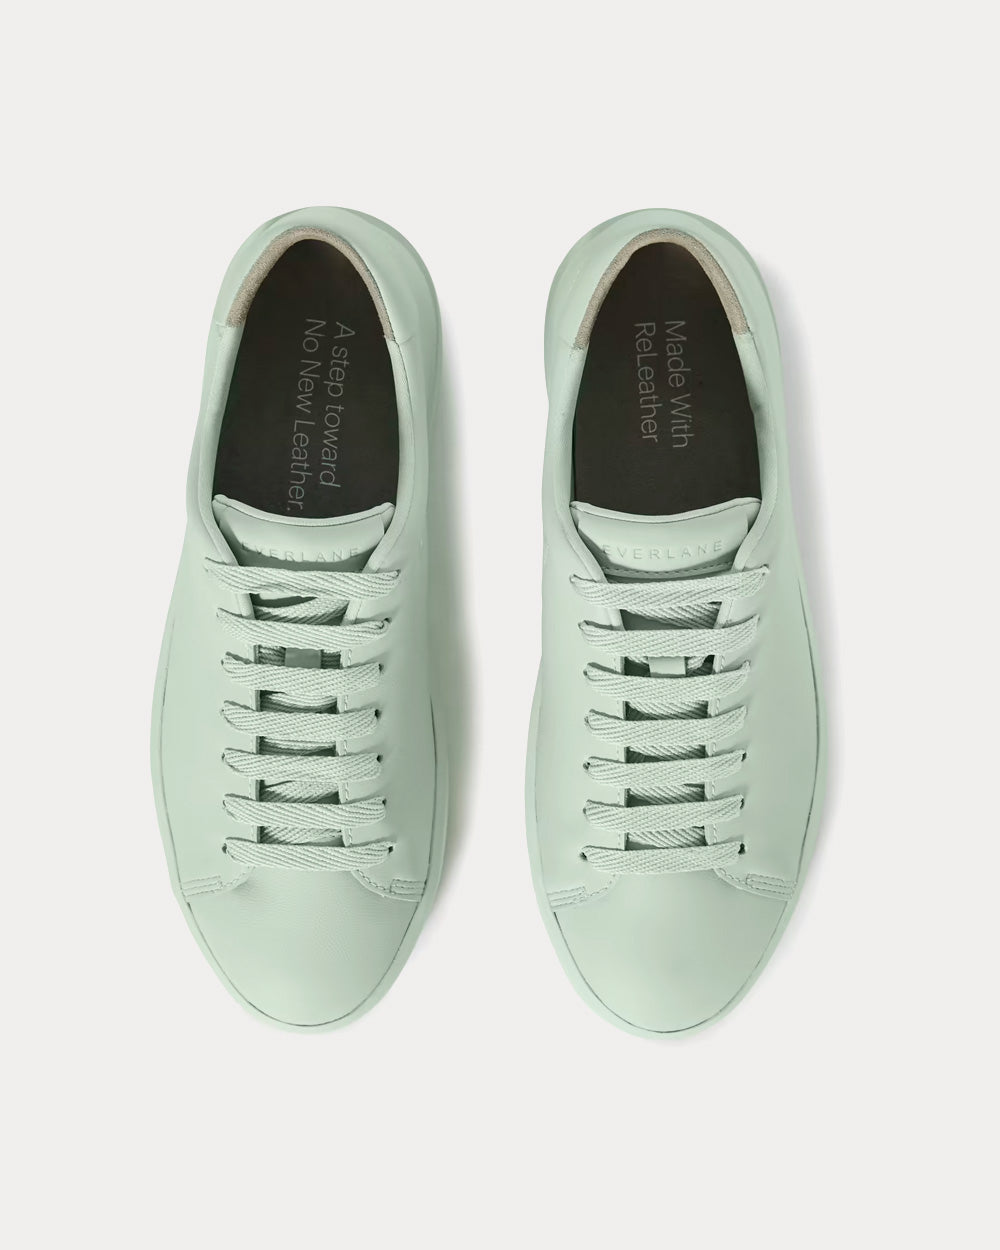 Everlane - ReLeather Tennis Lily Green Low Top Sneakers